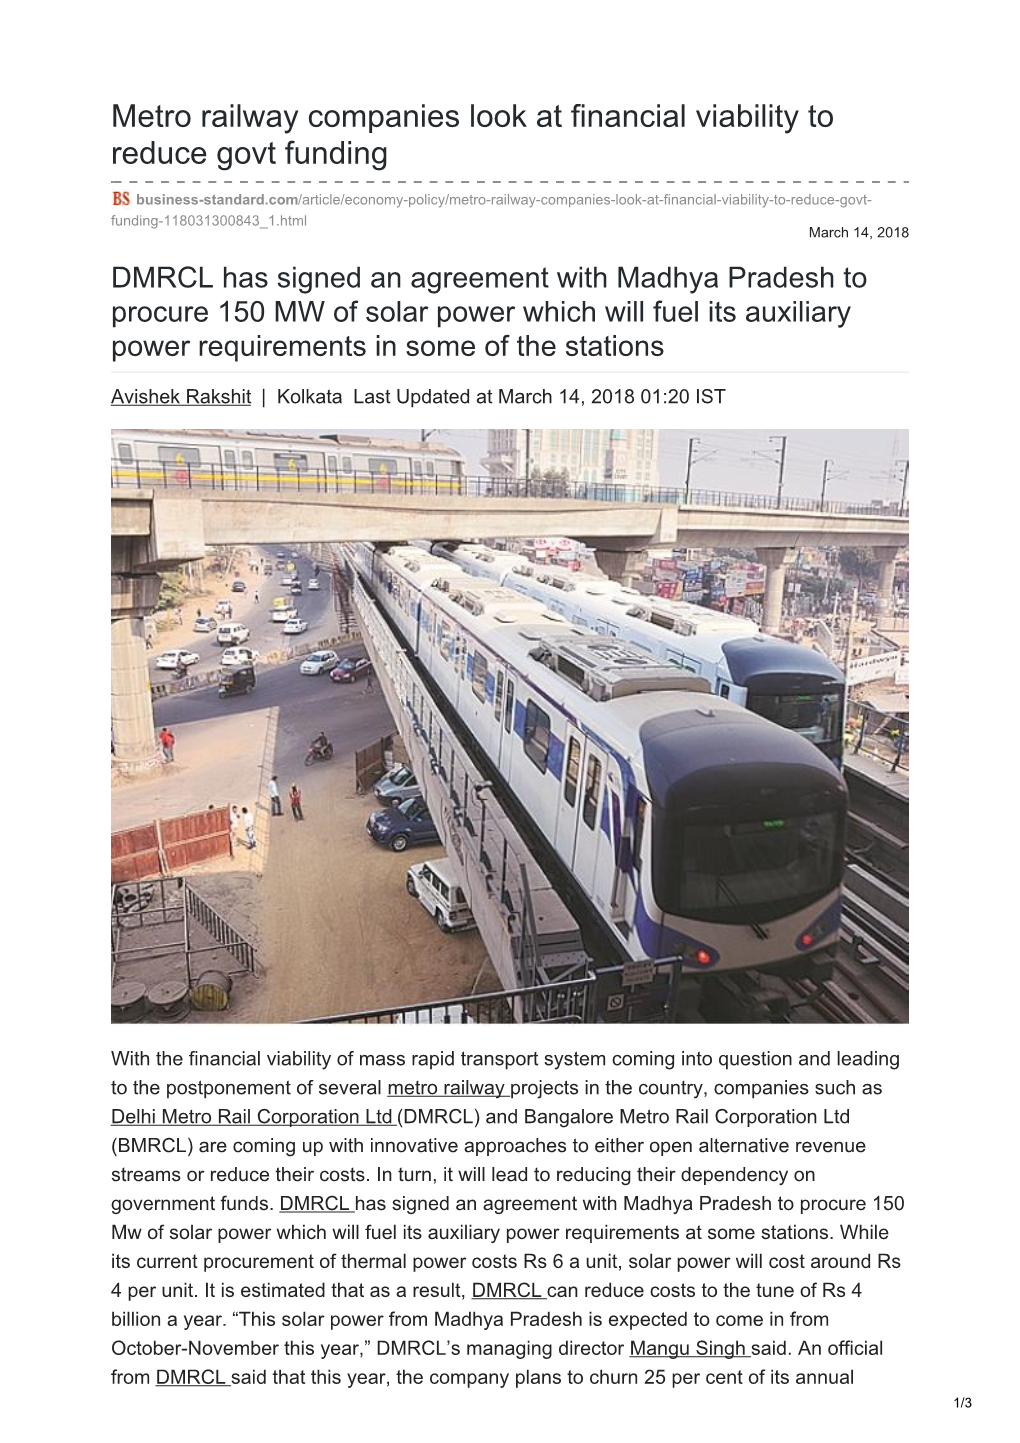 Metro Railway Companies Look at Financial Viability to Reduce Govt Funding